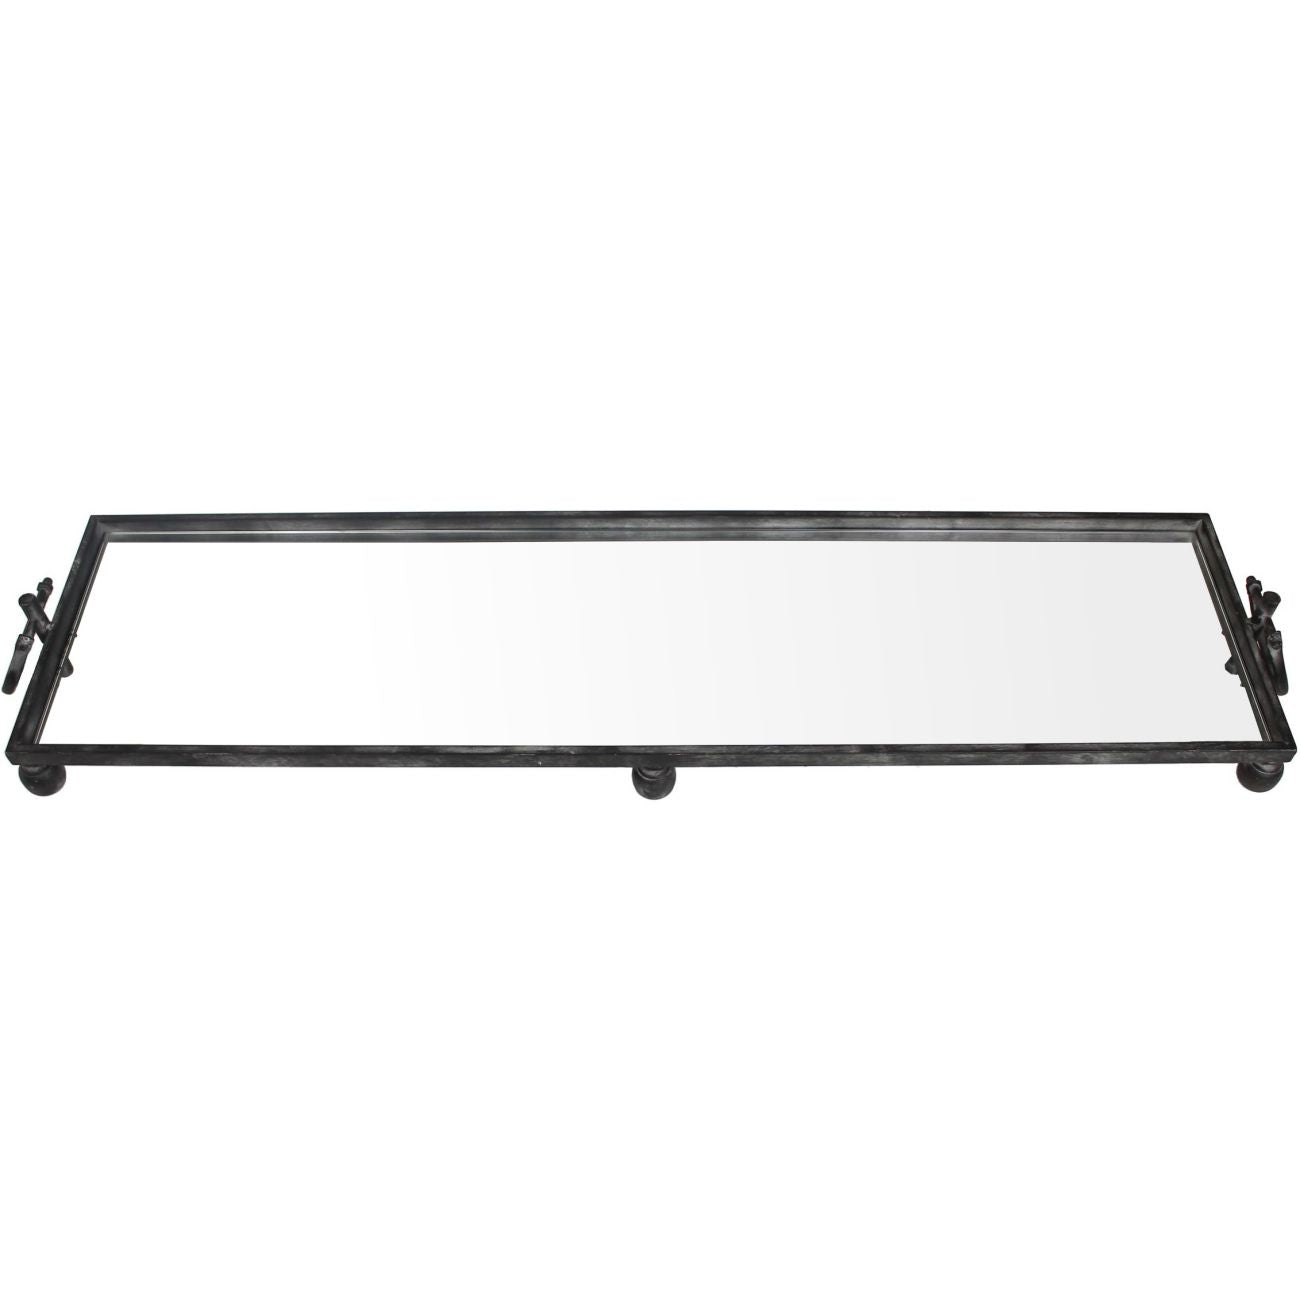 Black Metal Tray with Mirrored Base, Large